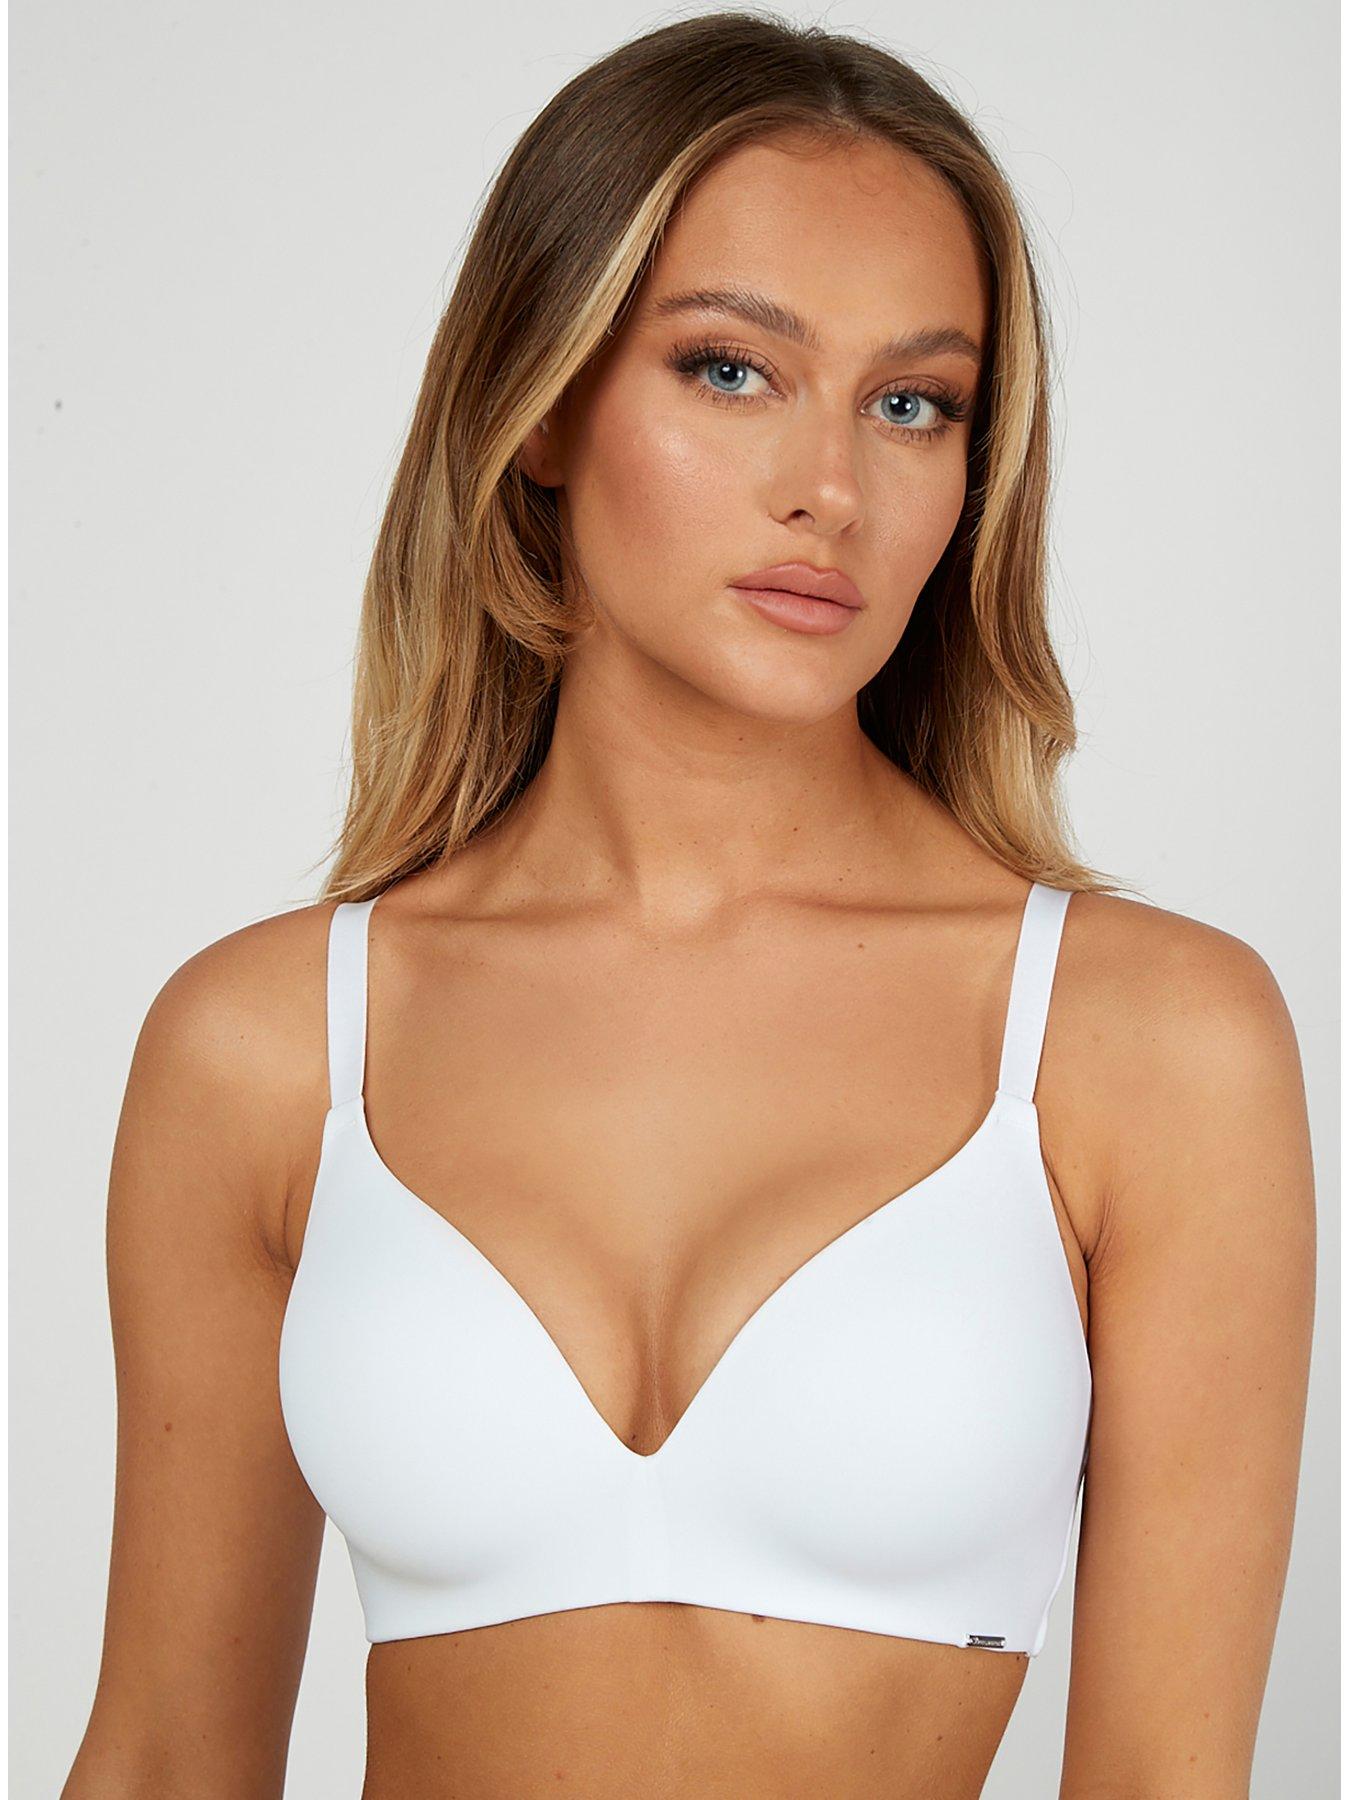 Boux Avenue - Soft strapless styles to support your shape